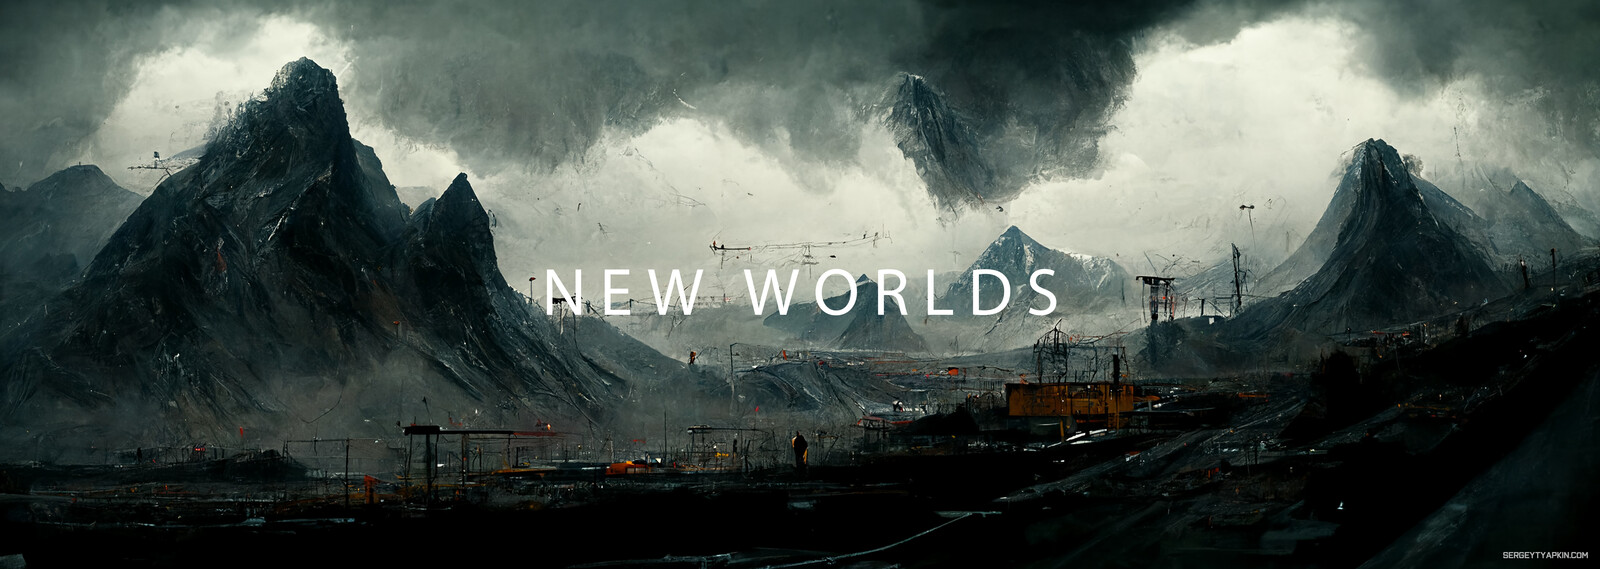 New Worlds - MidJourney Experiments